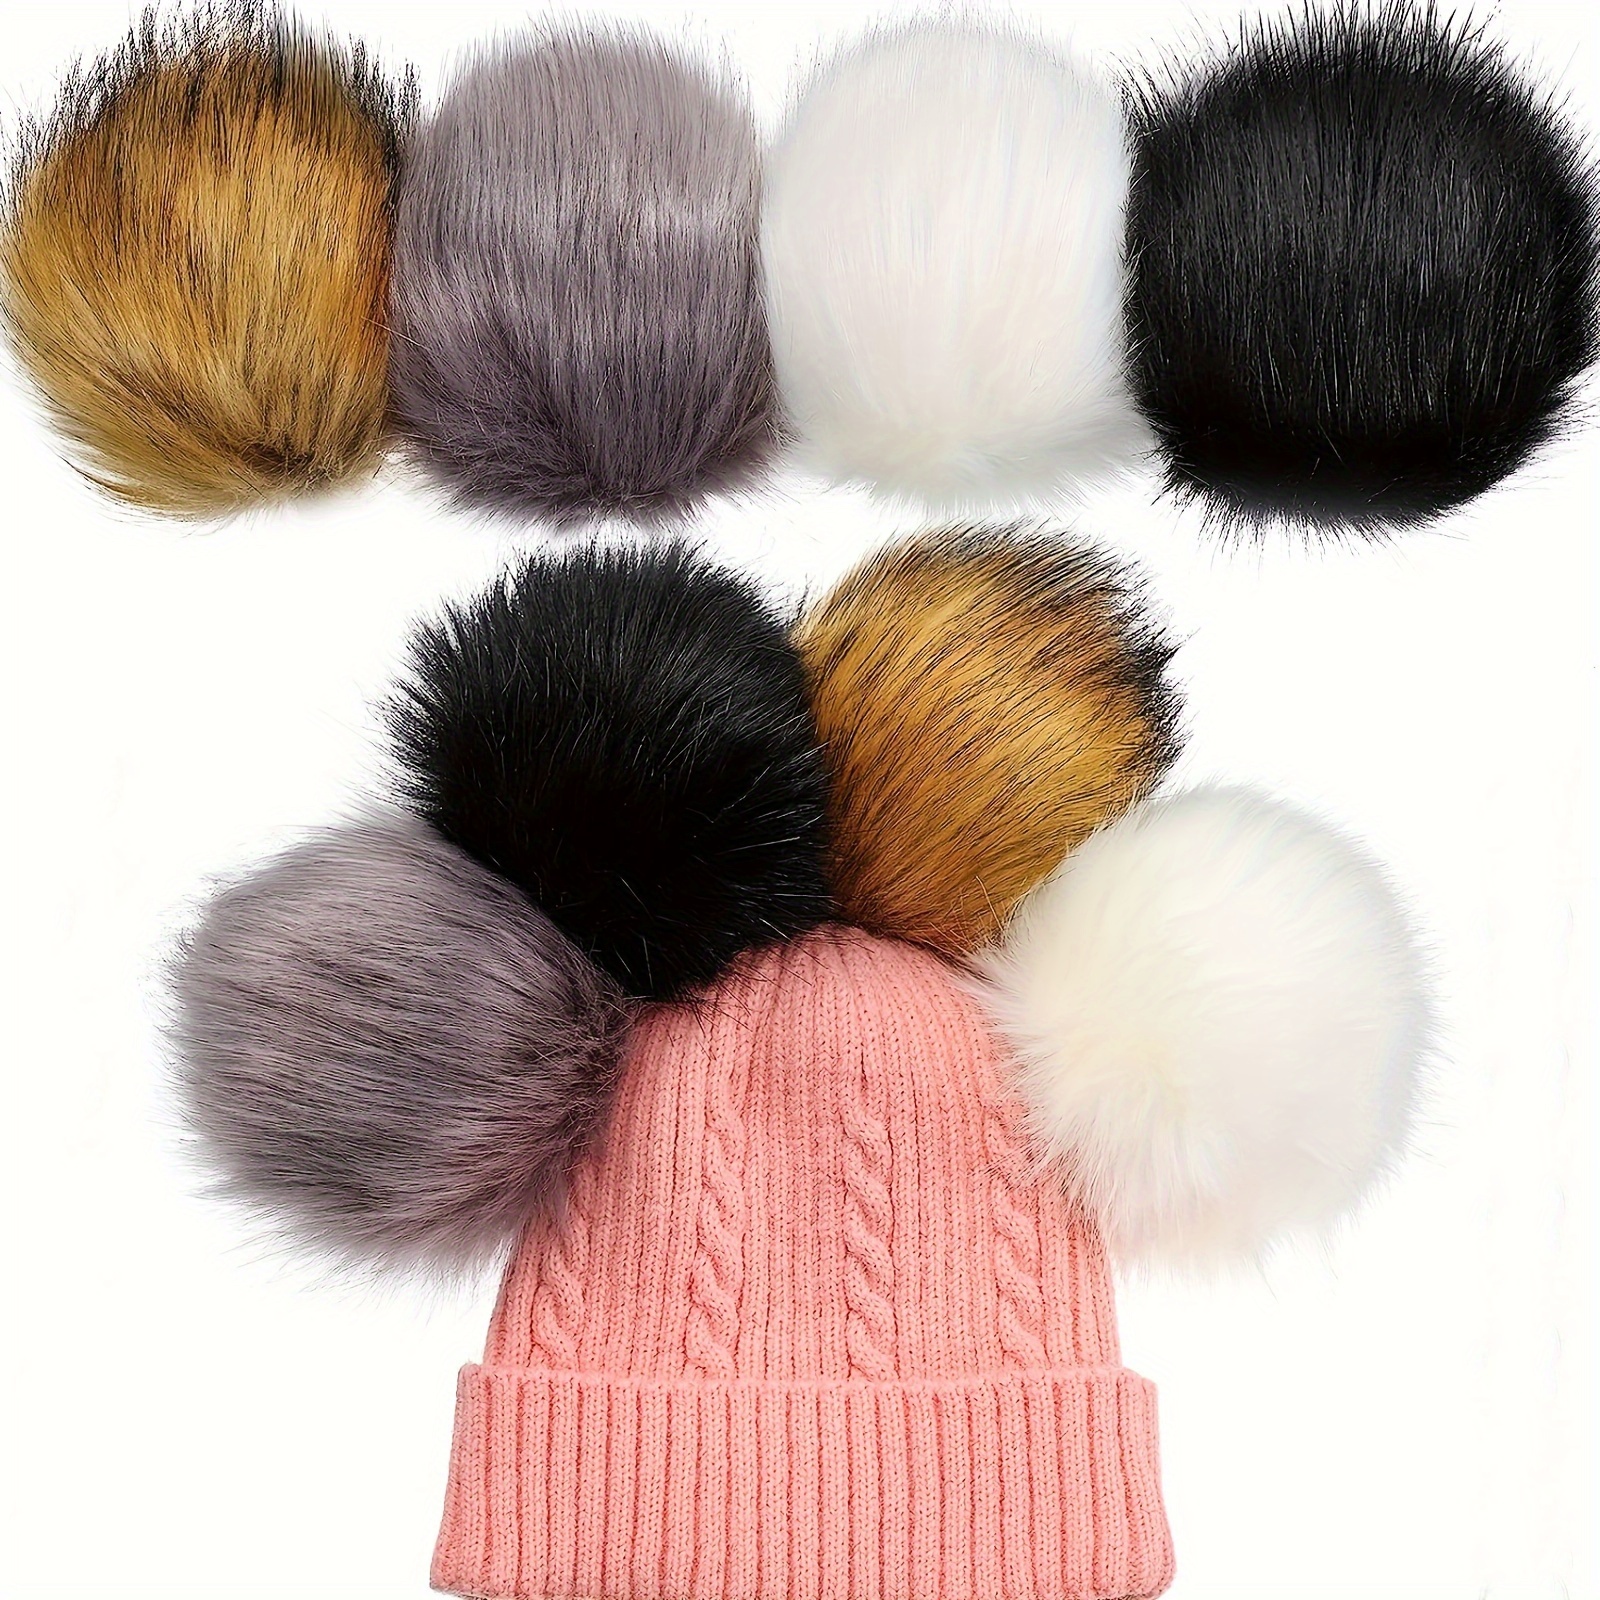  100 Pcs Faux Fur Pom Poms for Hats Faux Fur Fluffy Pom Pom  Balls with Elastic Loop for DIY Crafts Removable Knitting Accessories for  Shoes Gloves Bags Scarves Keychain (Assorted Colors)